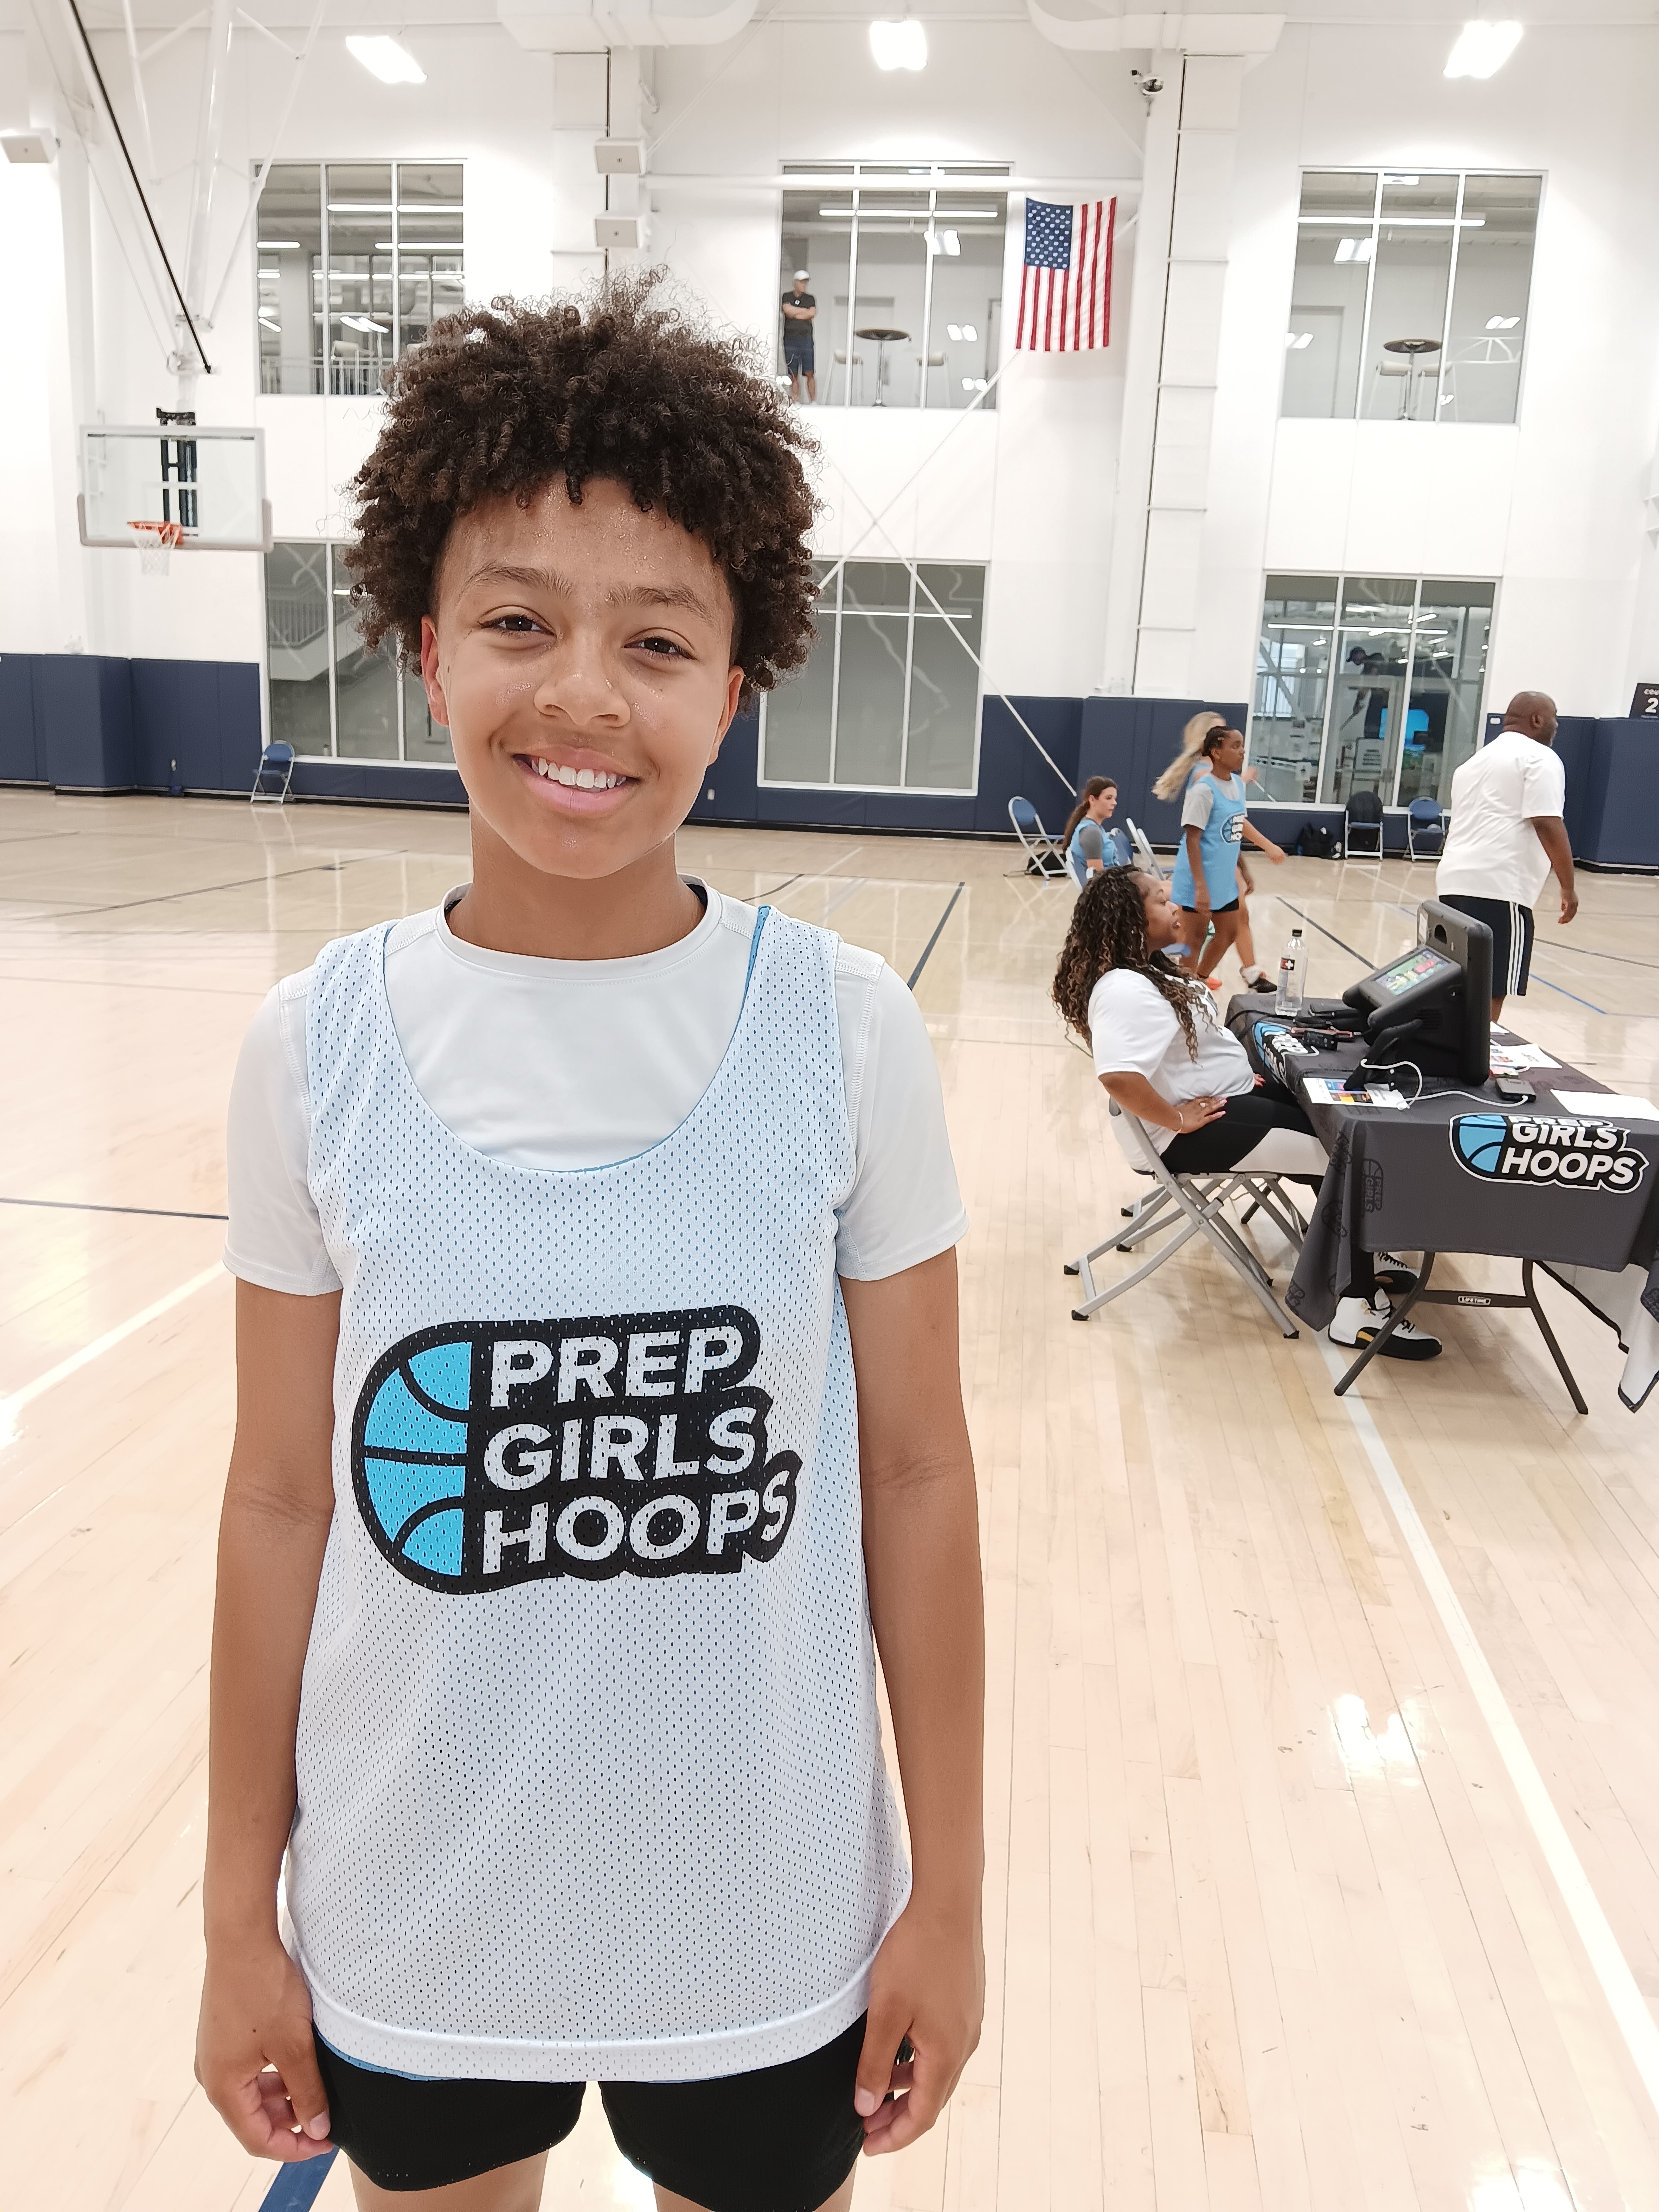 <span class="pn-tooltip pn-player-link">
        <span class="name-pointer">PGH Freshman Showcase DMV-Standout Performers</span>
        <span class="info-box not-prose" style="background: linear-gradient(to bottom, rgba(1,183,255, 0.95) 0%,rgba(1,183,255, 1) 100%)">
            <a href="https://prepgirlshoops.com/2023/08/pgh-freshman-showcase-dmv-standout-performers/" class="link-wrap">
                                    <span class="player-img"><img src="https://prepgirlshoops.com/wp-content/uploads/sites/4/2023/08/20230827_094220-rotated.jpg?w=150&h=150&crop=1" alt="PGH Freshman Showcase DMV-Standout Performers"></span>
                
                <span class="player-details">
                    <span class="first-name">PGH</span>
                    <span class="last-name">Freshman Showcase DMV-Standout Performers</span>
                    <span class="measurables">
                                            </span>
                                    </span>
                <span class="player-rank">
                                                        </span>
                                    <span class="state-abbr"></span>
                            </a>

            
        </span>
    </span>
